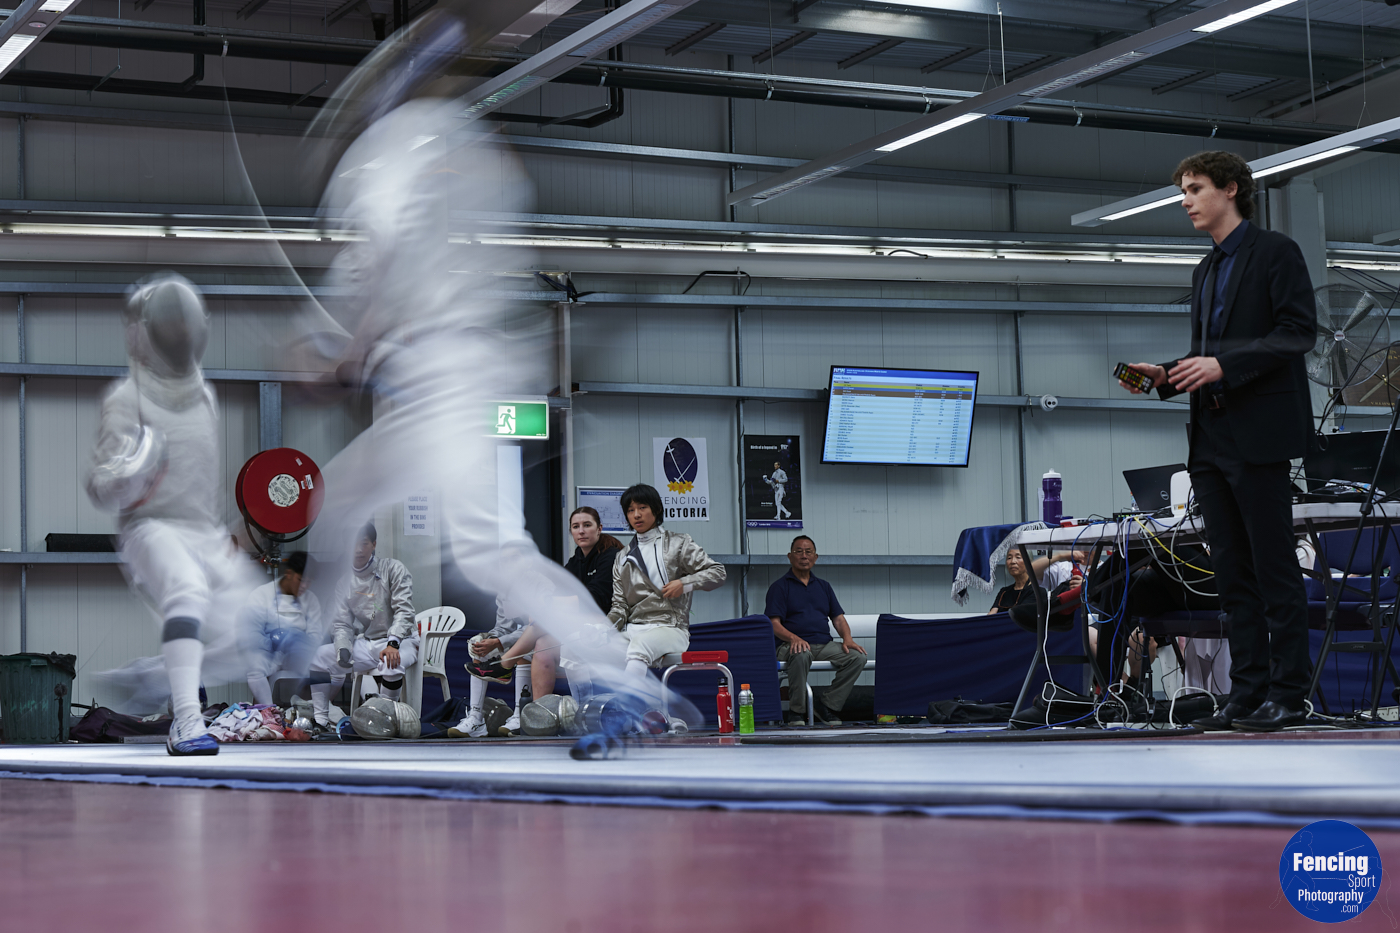 Becoming a Fencing Referee can Benefit Your Fencing and Develop Skills on Decision Making